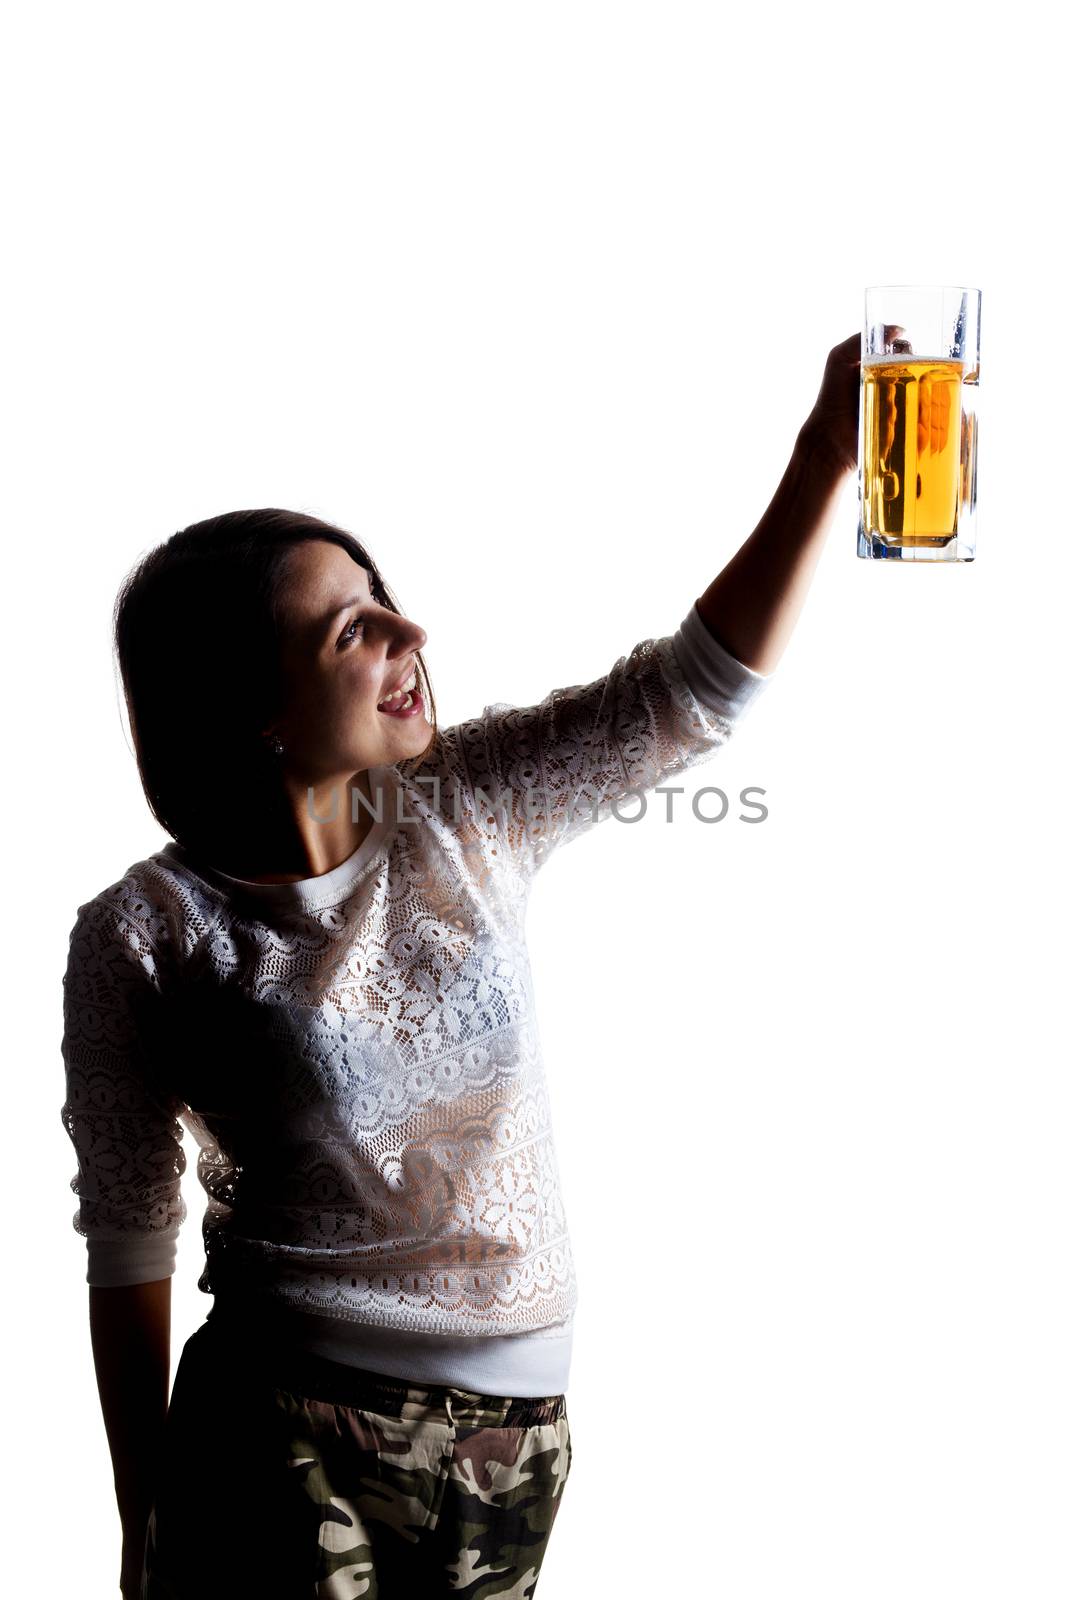 happy girl cheering with a beer mug against white background, half silhouette